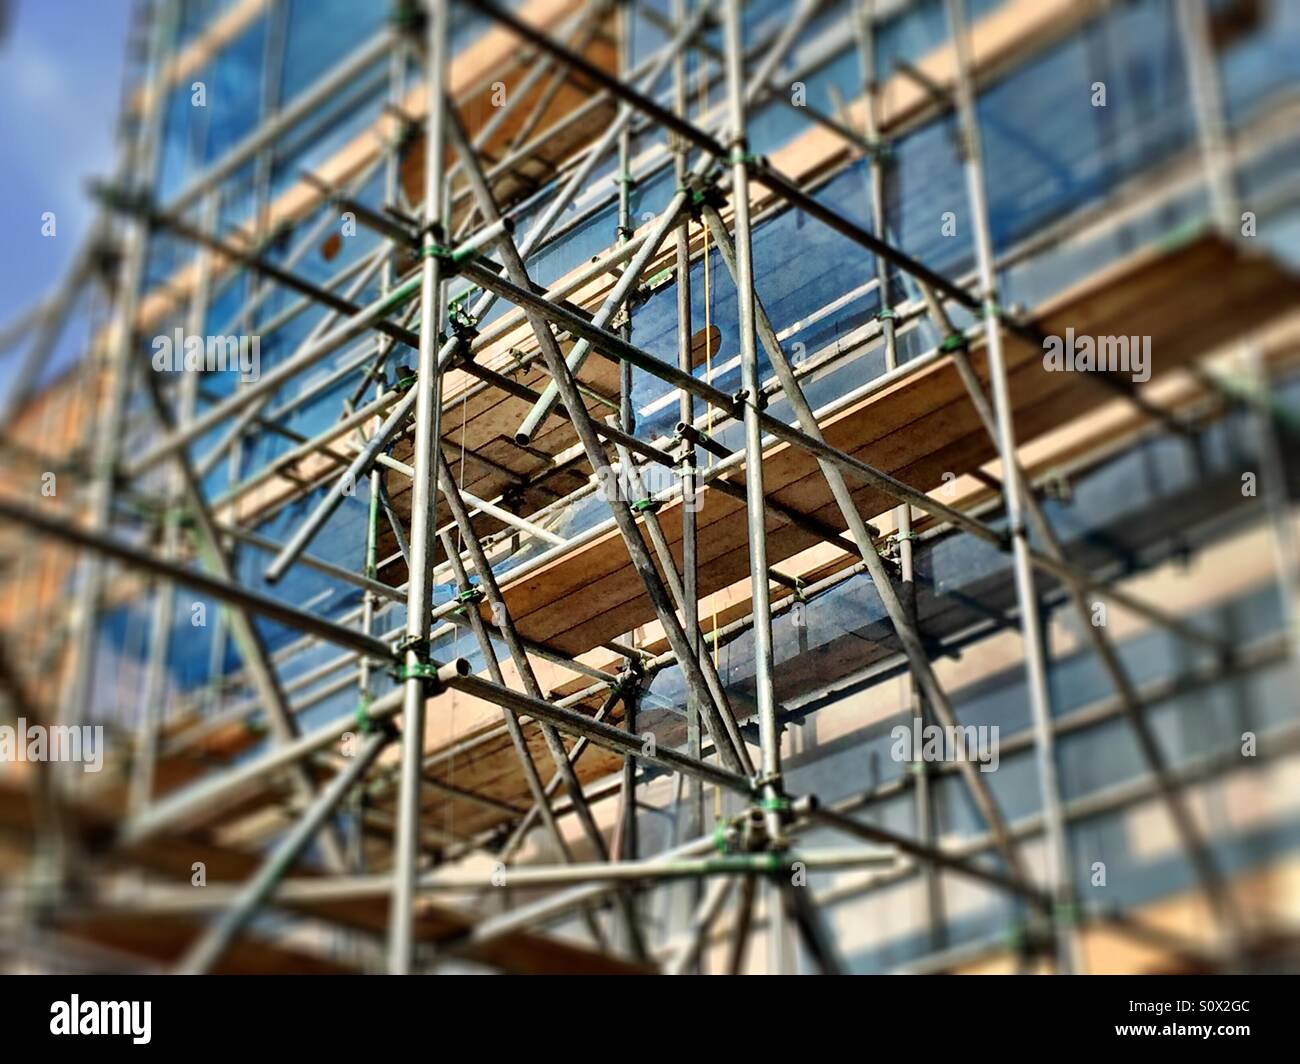 Construction site with scaffolding Stock Photo